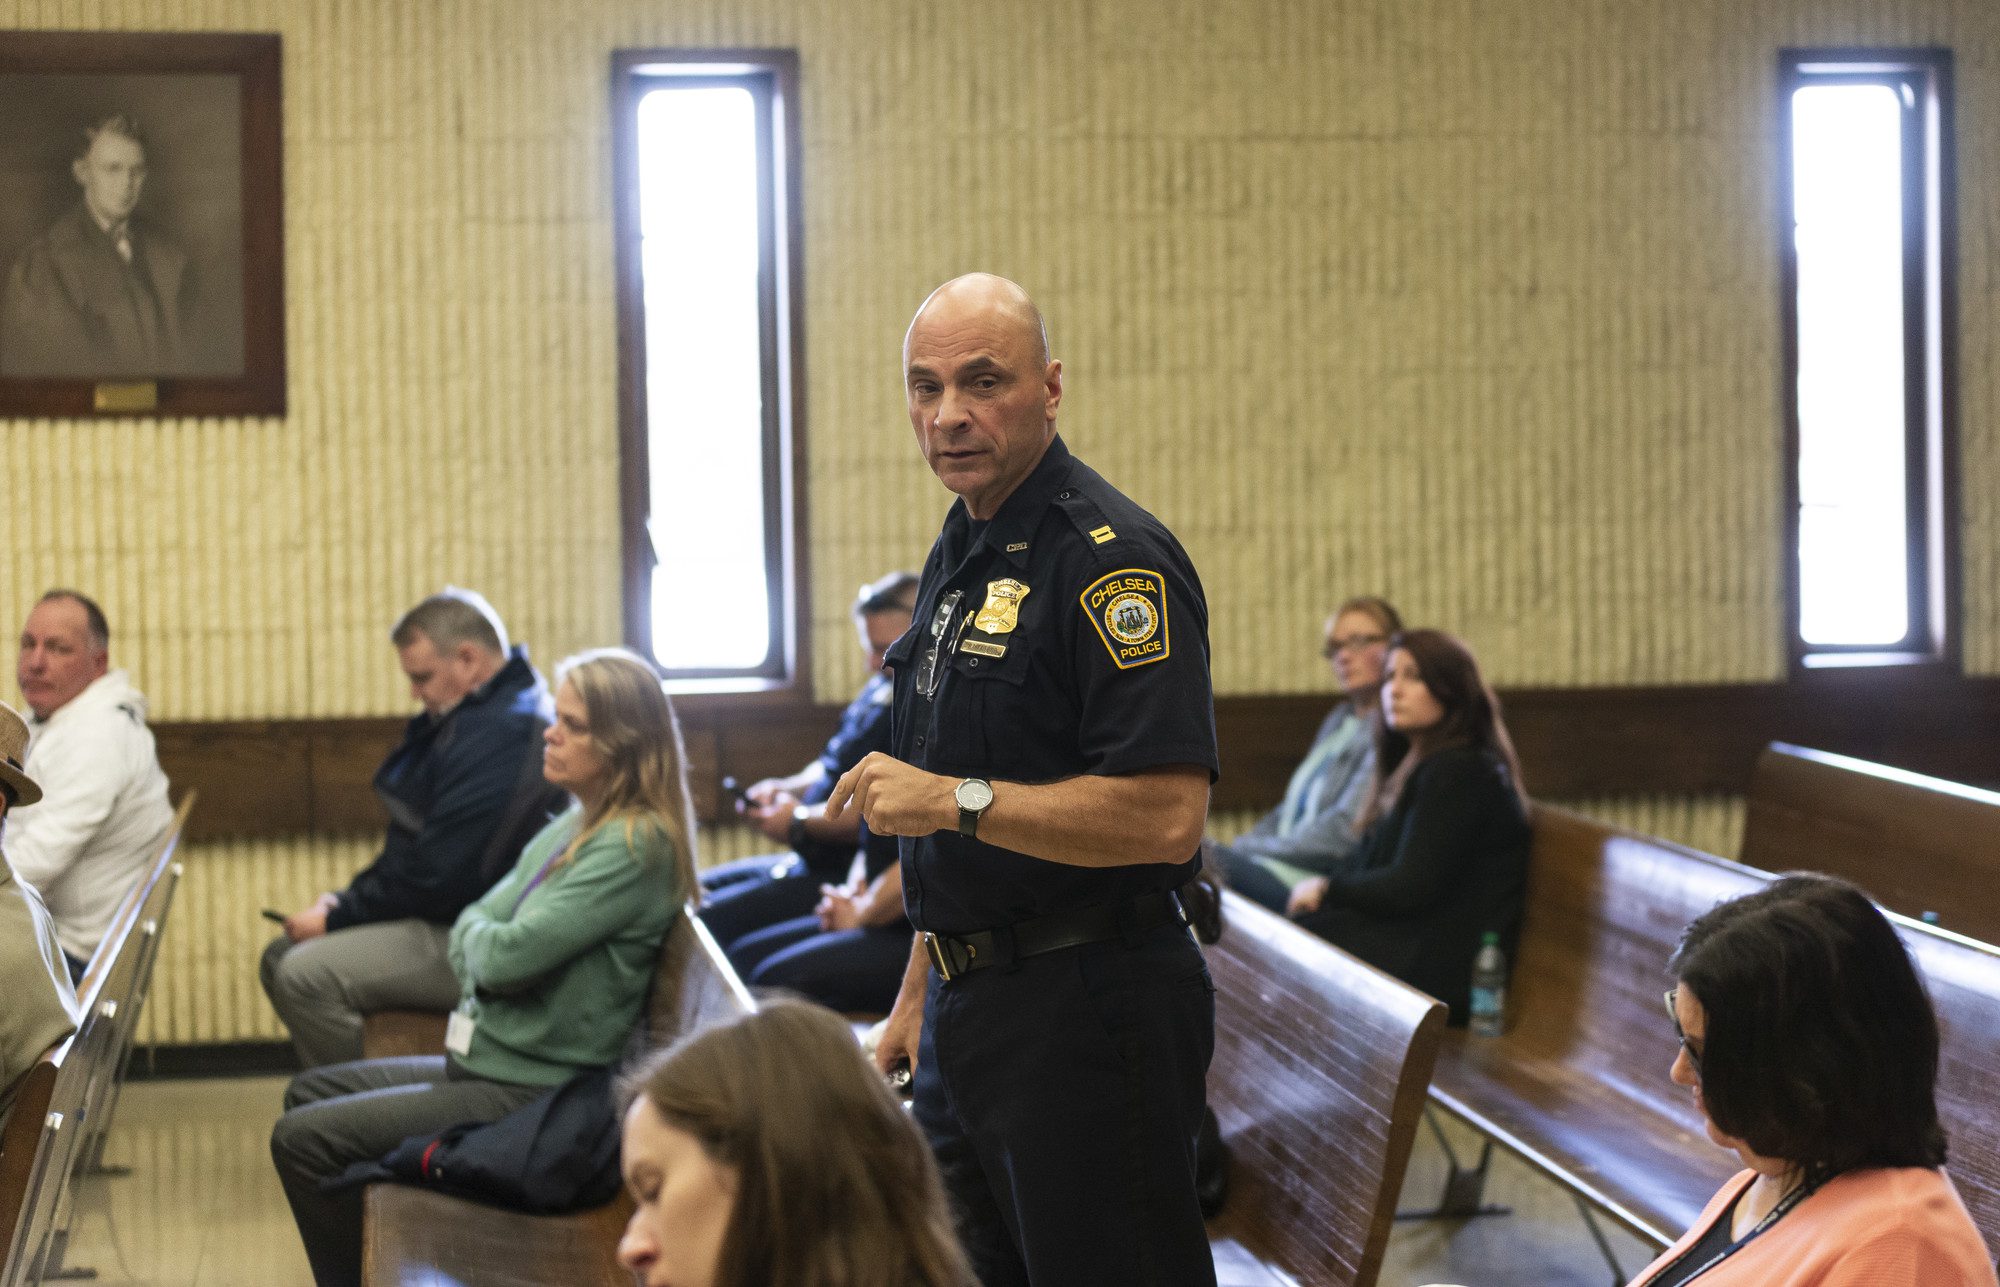 Chelsea Police Captain Dave Batchelor teaches the crowd gathered in Courtroom 2 of Lynn District Court about the Hub model on Wednesday.